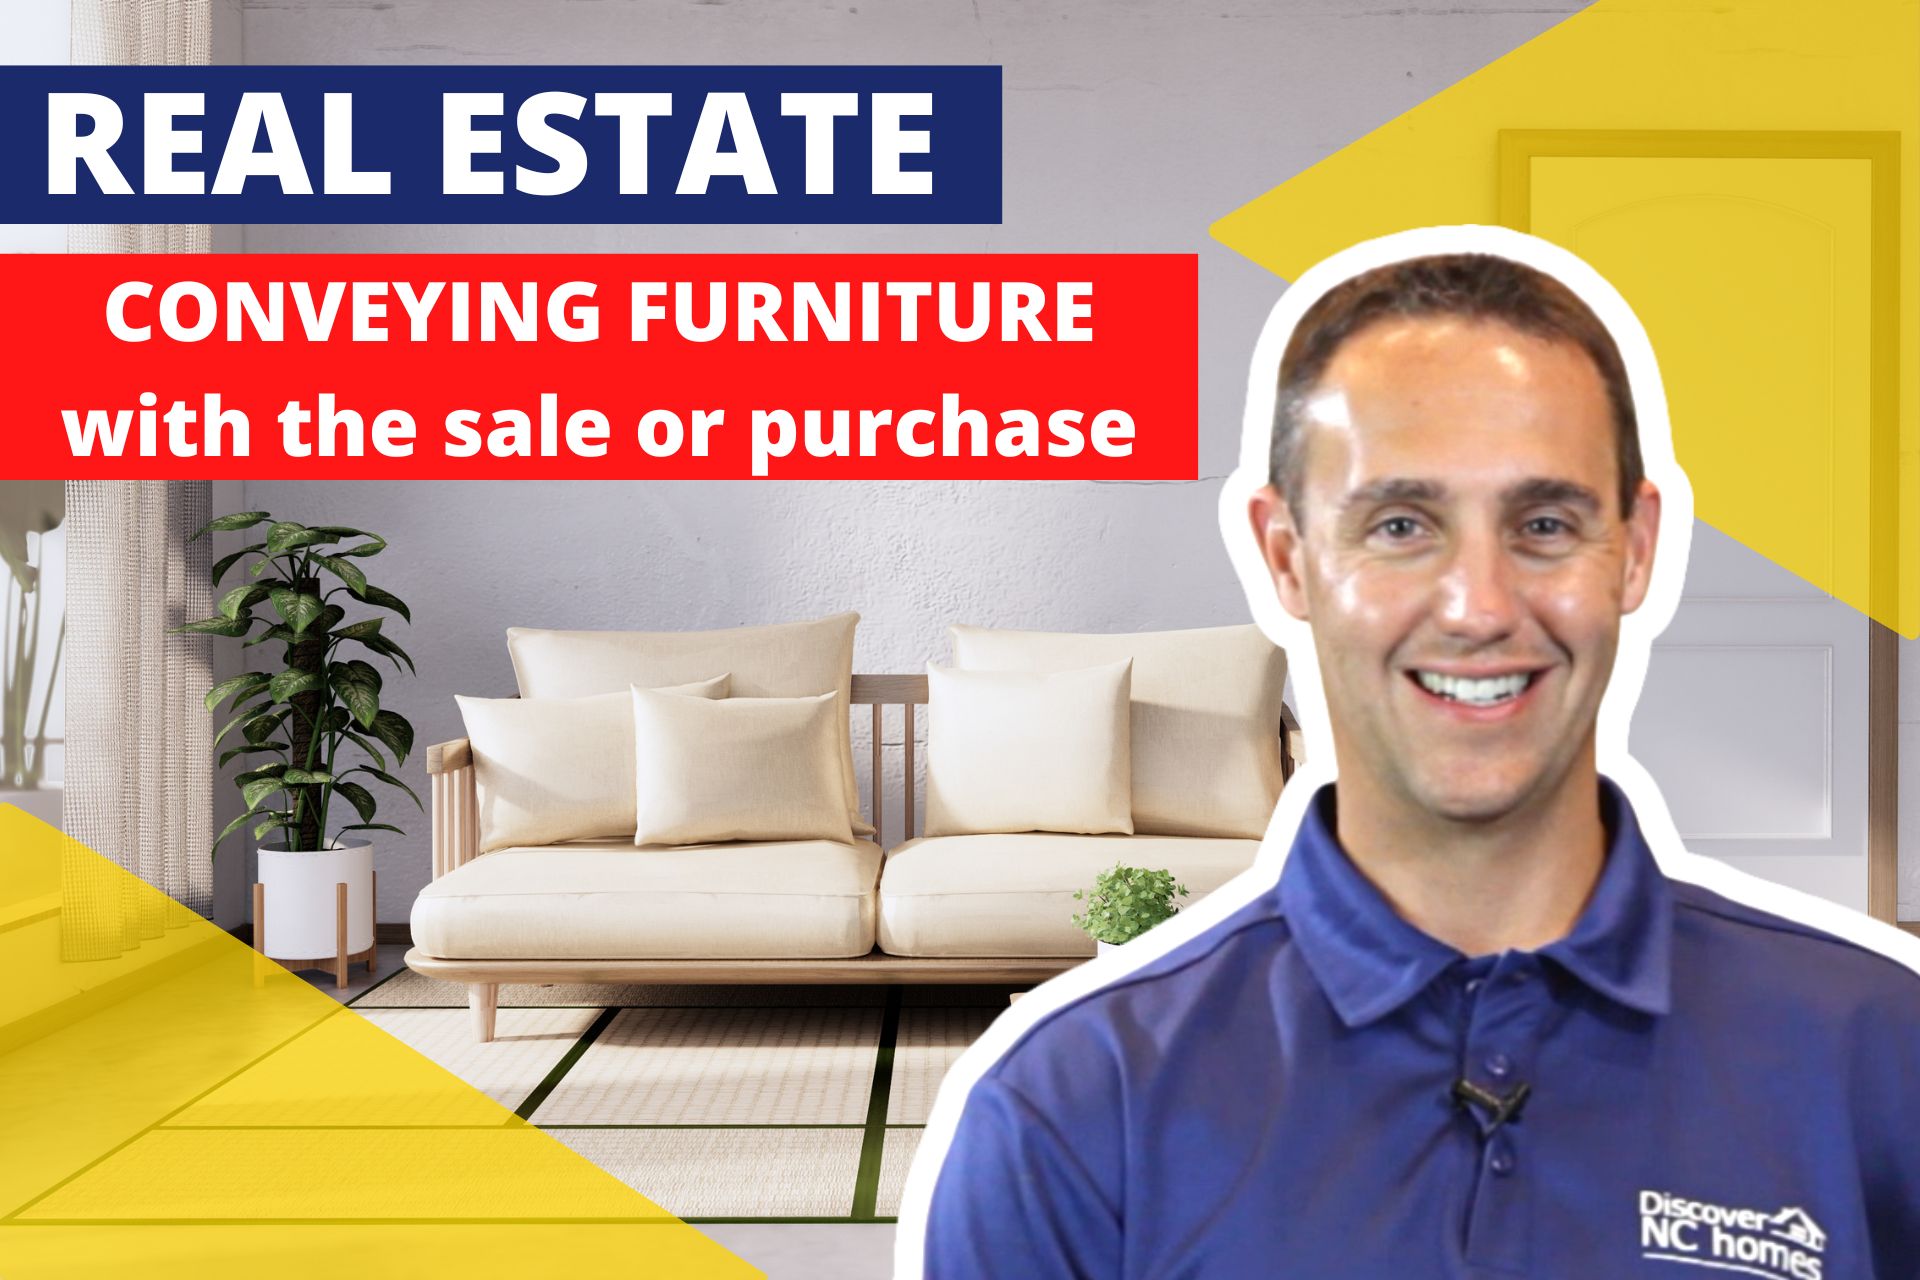 Conveying furniture in a real estate transaction